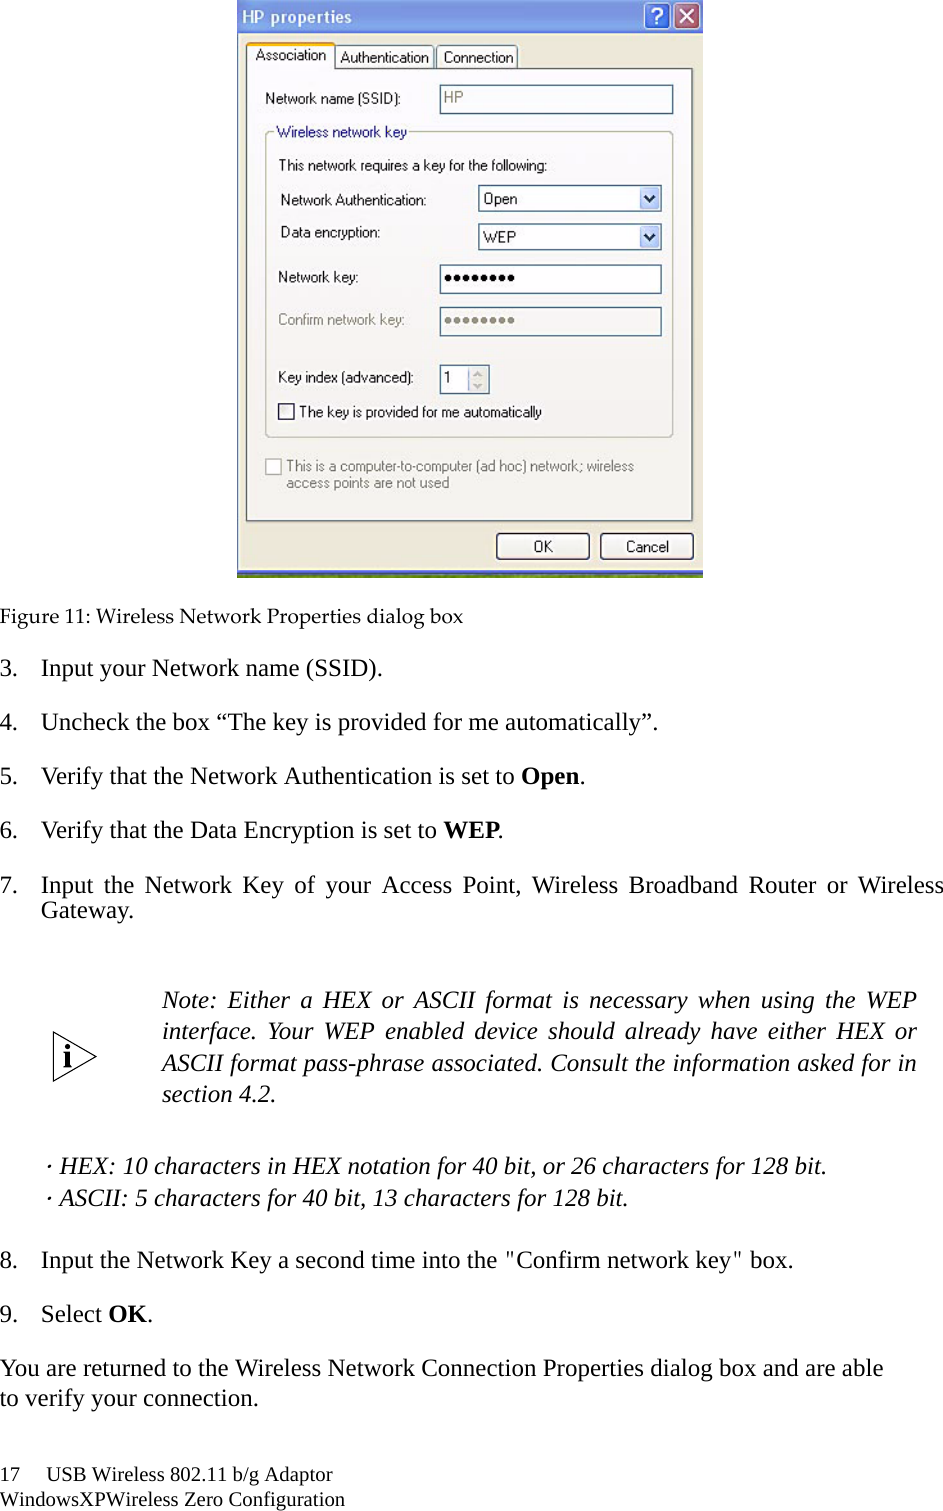 17     USB Wireless 802.11 b/g AdaptorWindowsXPWireless Zero ConfigurationFigure11:WirelessNetworkPropertiesdialogbox3. Input your Network name (SSID).4. Uncheck the box “The key is provided for me automatically”.5. Verify that the Network Authentication is set to Open.6. Verify that the Data Encryption is set to WEP.7. Input the Network Key of your Access Point, Wireless Broadband Router or WirelessGateway.．HEX: 10 characters in HEX notation for 40 bit, or 26 characters for 128 bit.．ASCII: 5 characters for 40 bit, 13 characters for 128 bit.8. Input the Network Key a second time into the &quot;Confirm network key&quot; box.9. Select OK.You are returned to the Wireless Network Connection Properties dialog box and are ableto verify your connection.Note: Either a HEX or ASCII format is necessary when using the WEPinterface. Your WEP enabled device should already have either HEX orASCII format pass-phrase associated. Consult the information asked for insection 4.2. 